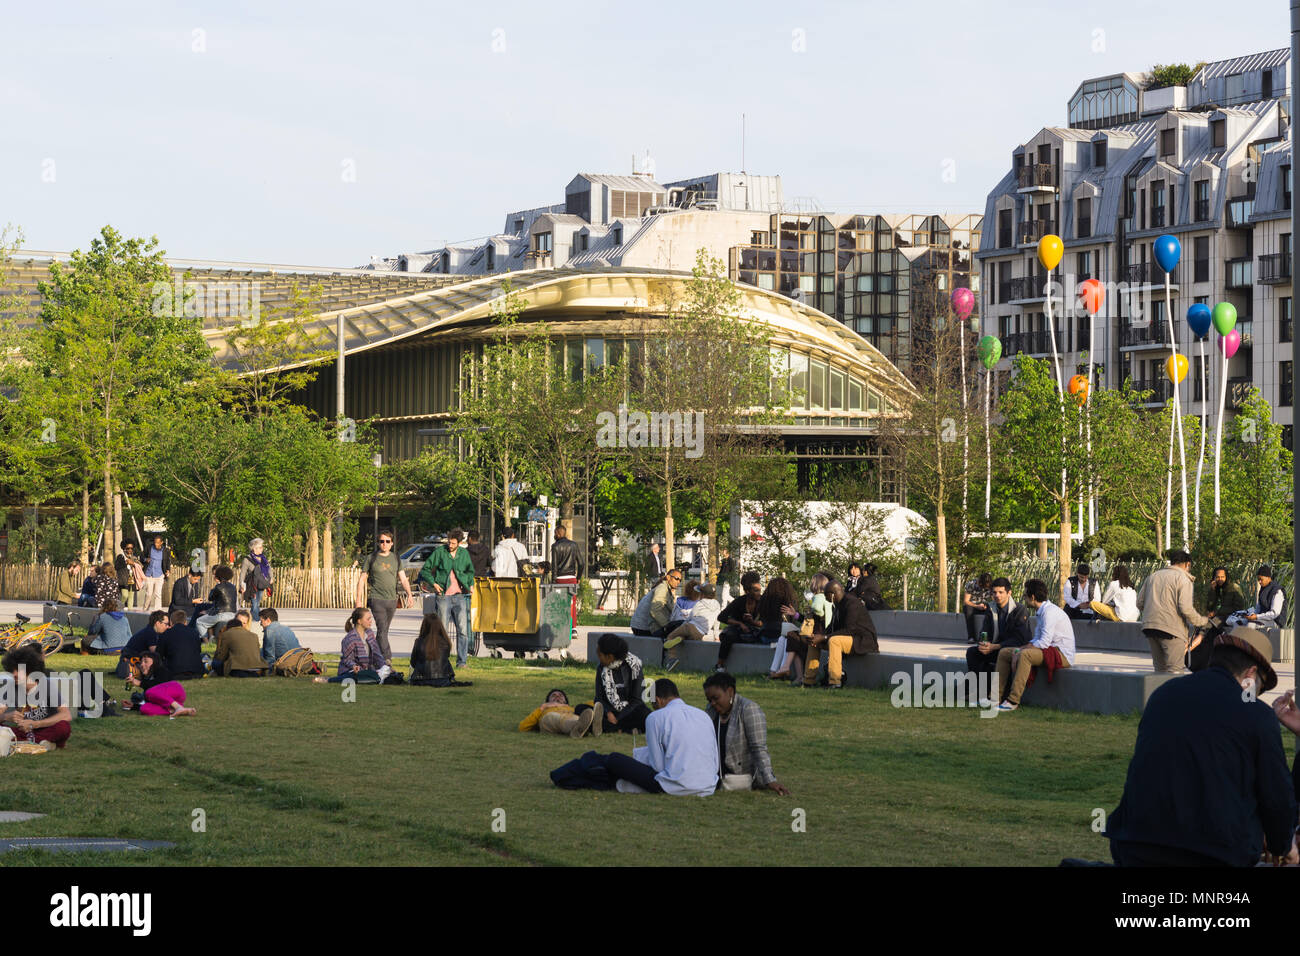 People relaxing in a park in Les Halles area in central Paris, France. Stock Photo